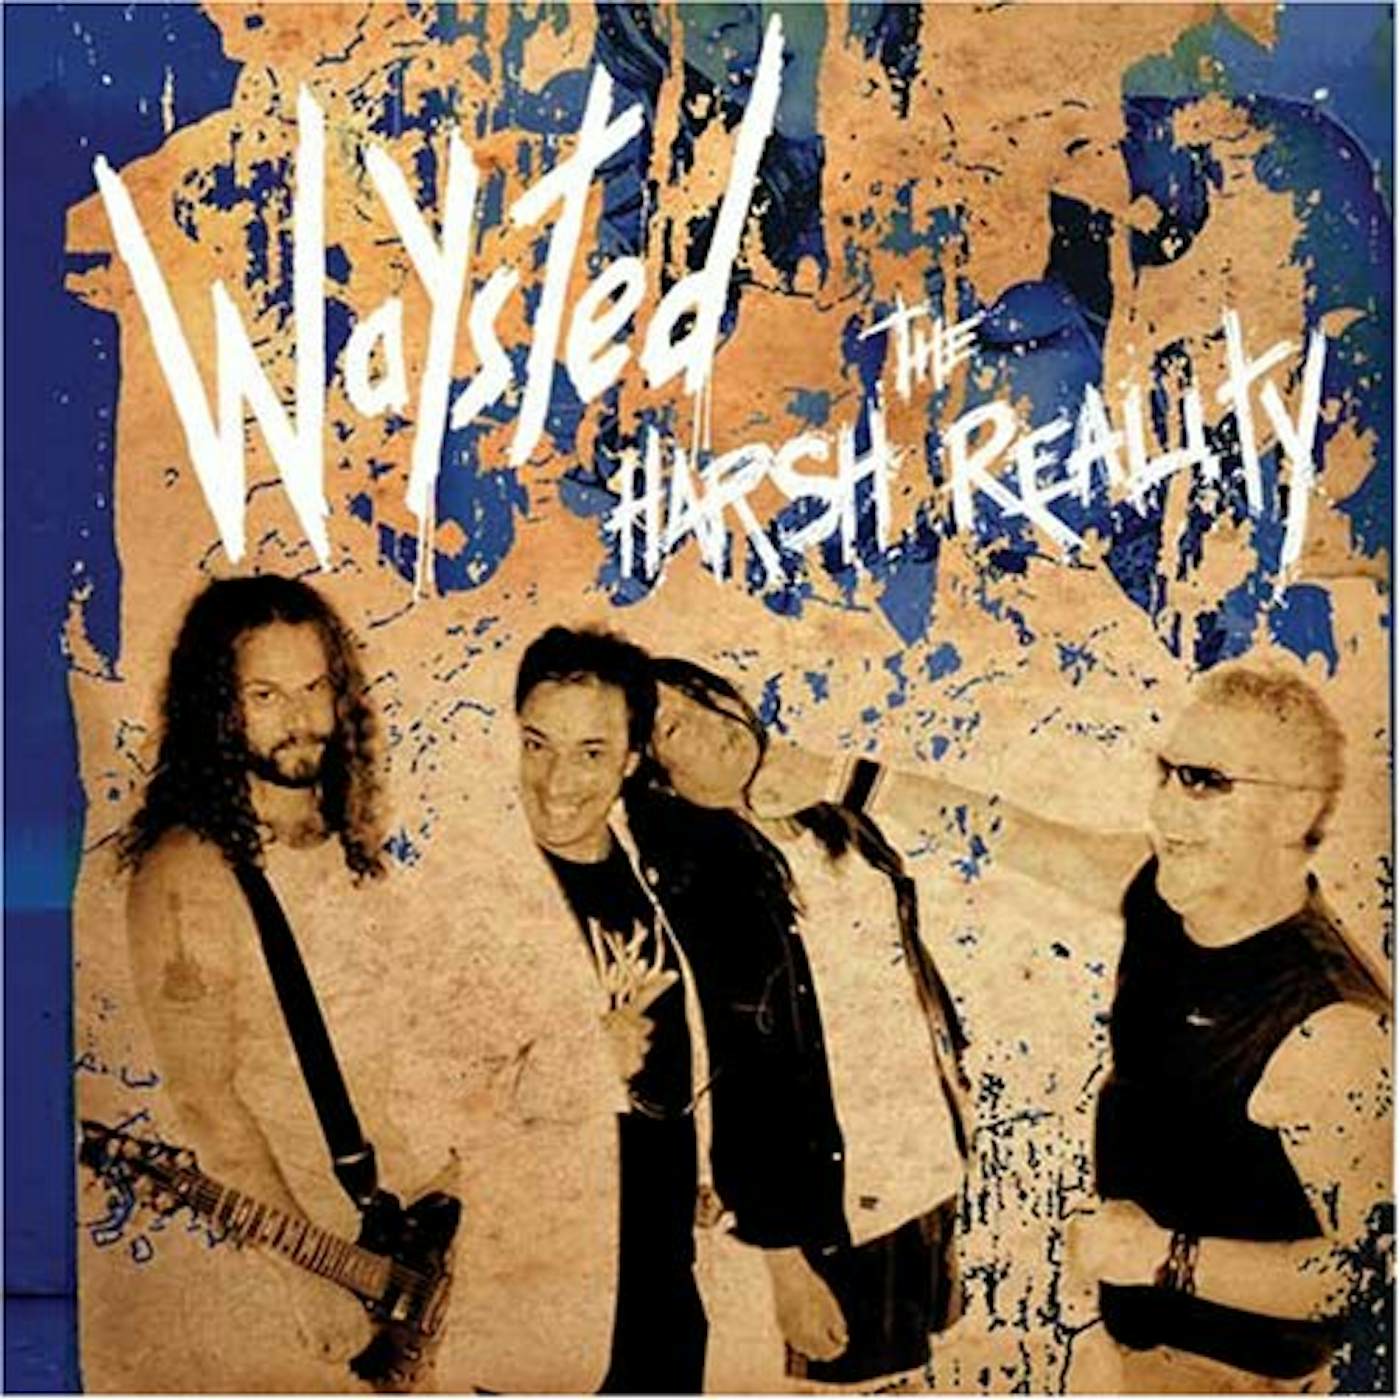 Waysted HARSH REALITY CD